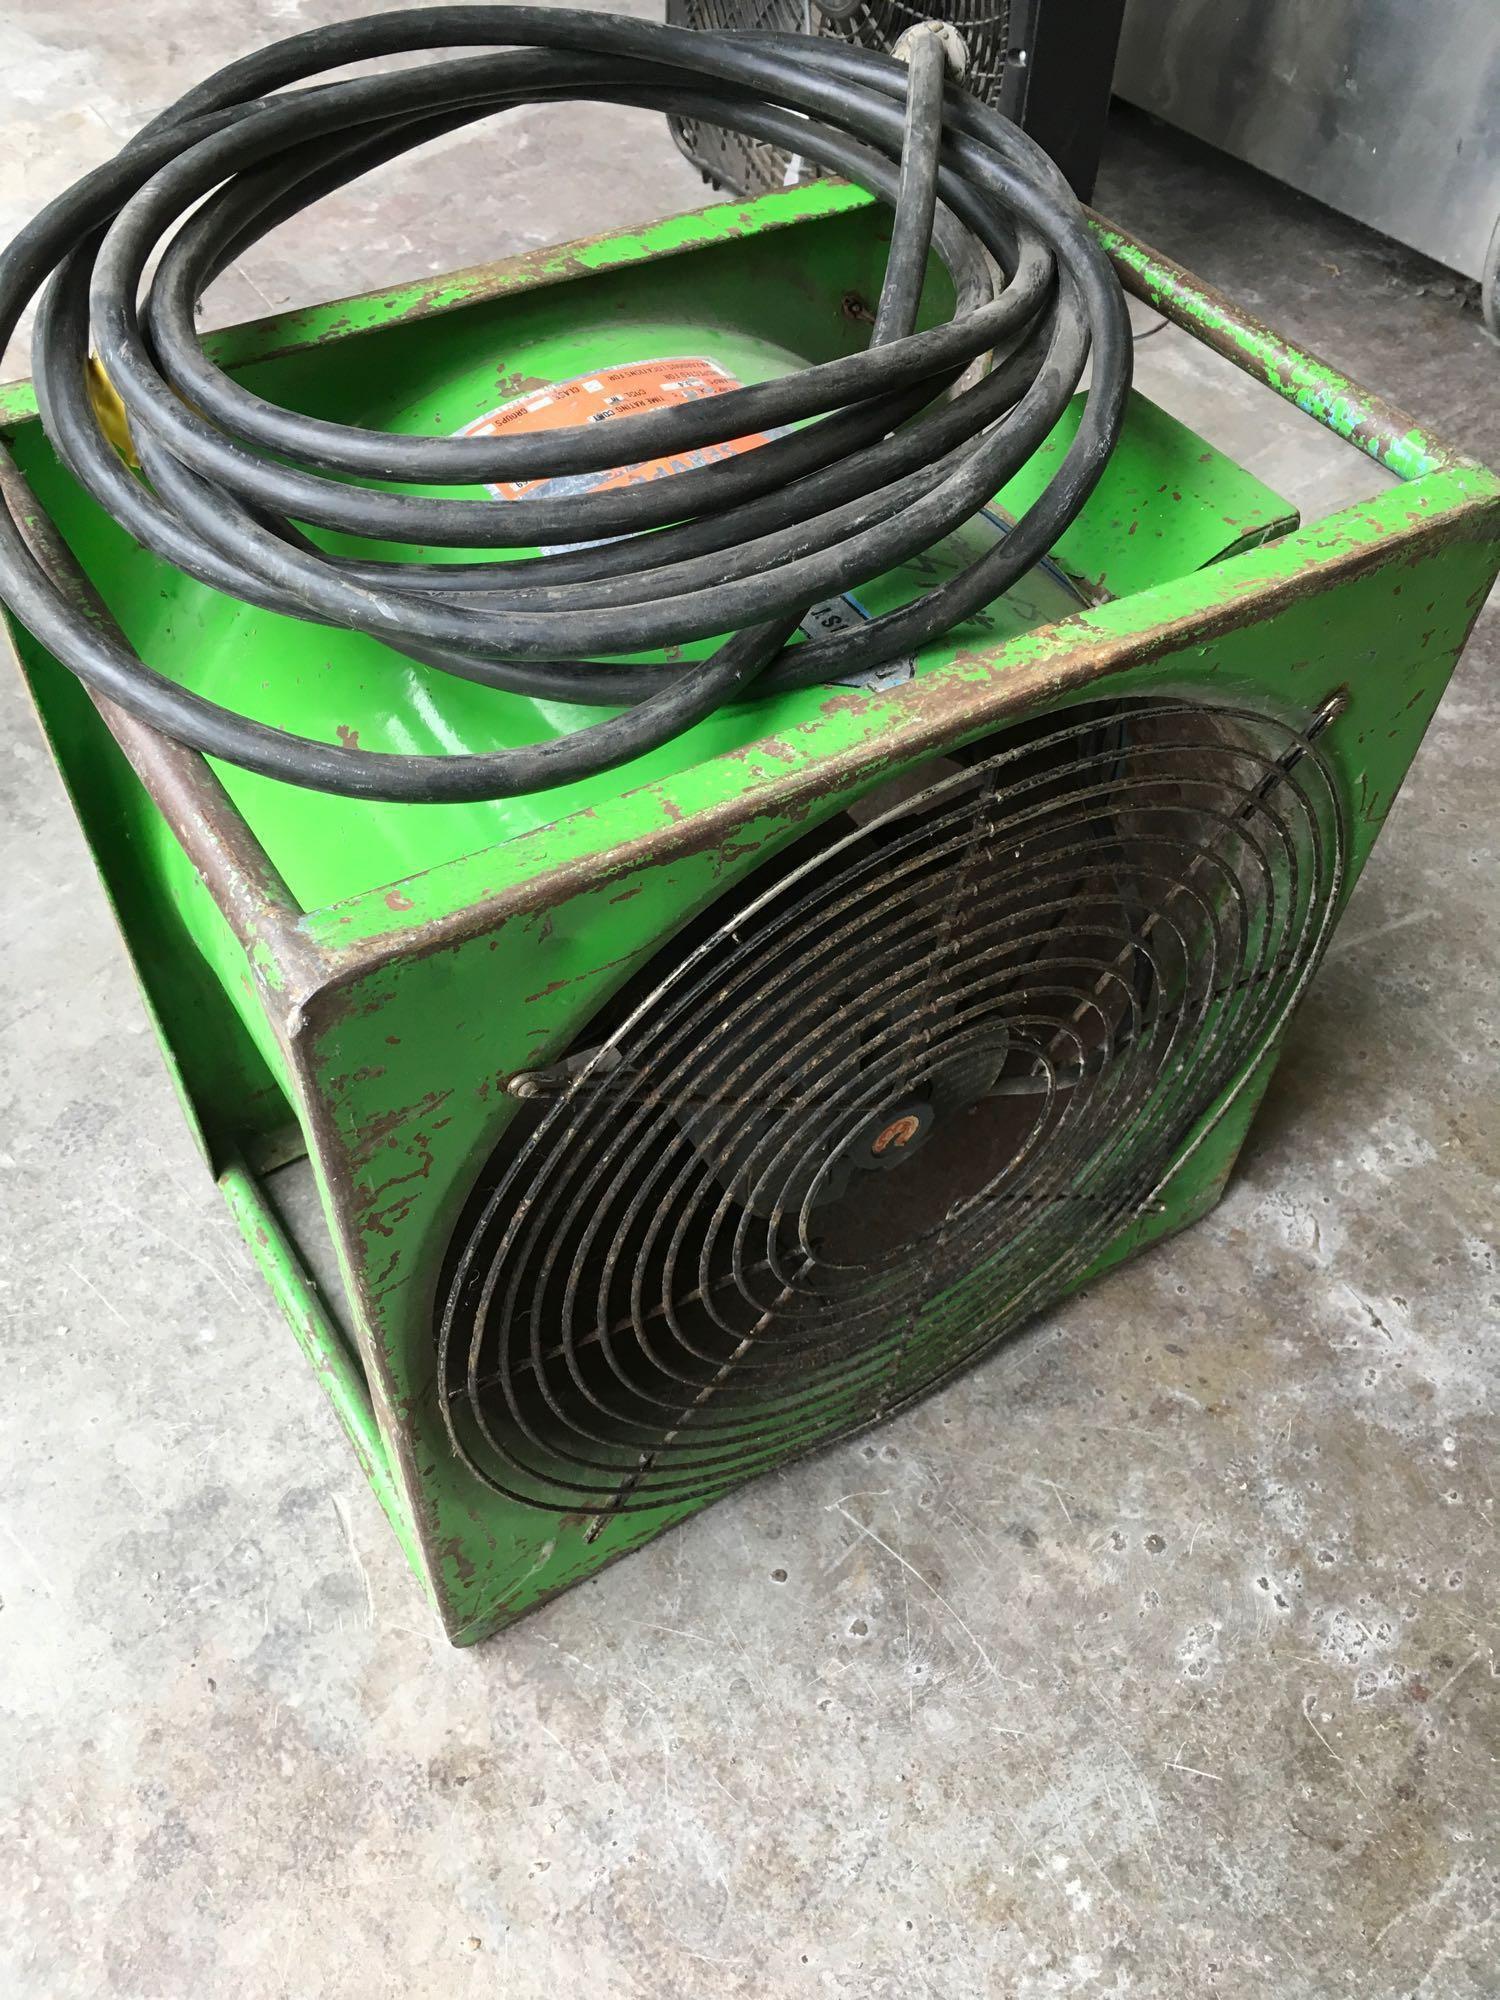 2 Servpro Fans model P-164- S. 5.4 AMPS. 1 has no tag to verify model